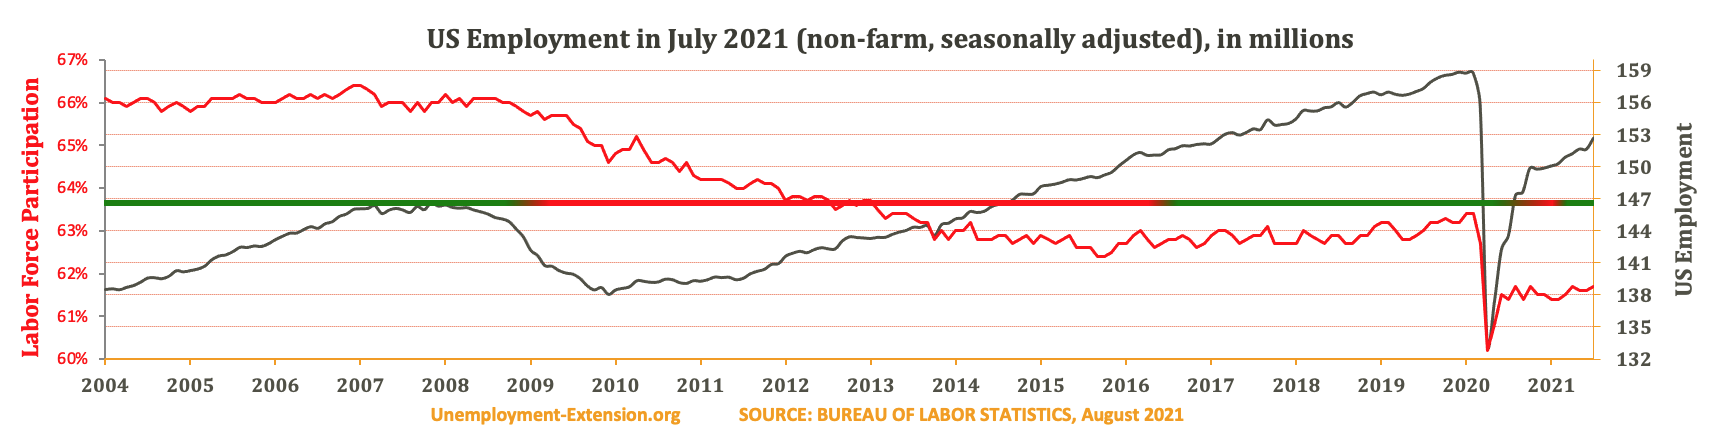 Total US Employment (non-farm, seasonally adjusted) in July 2021. US economy has lost approximately 10 million jobs in comparison to pre-resession level.